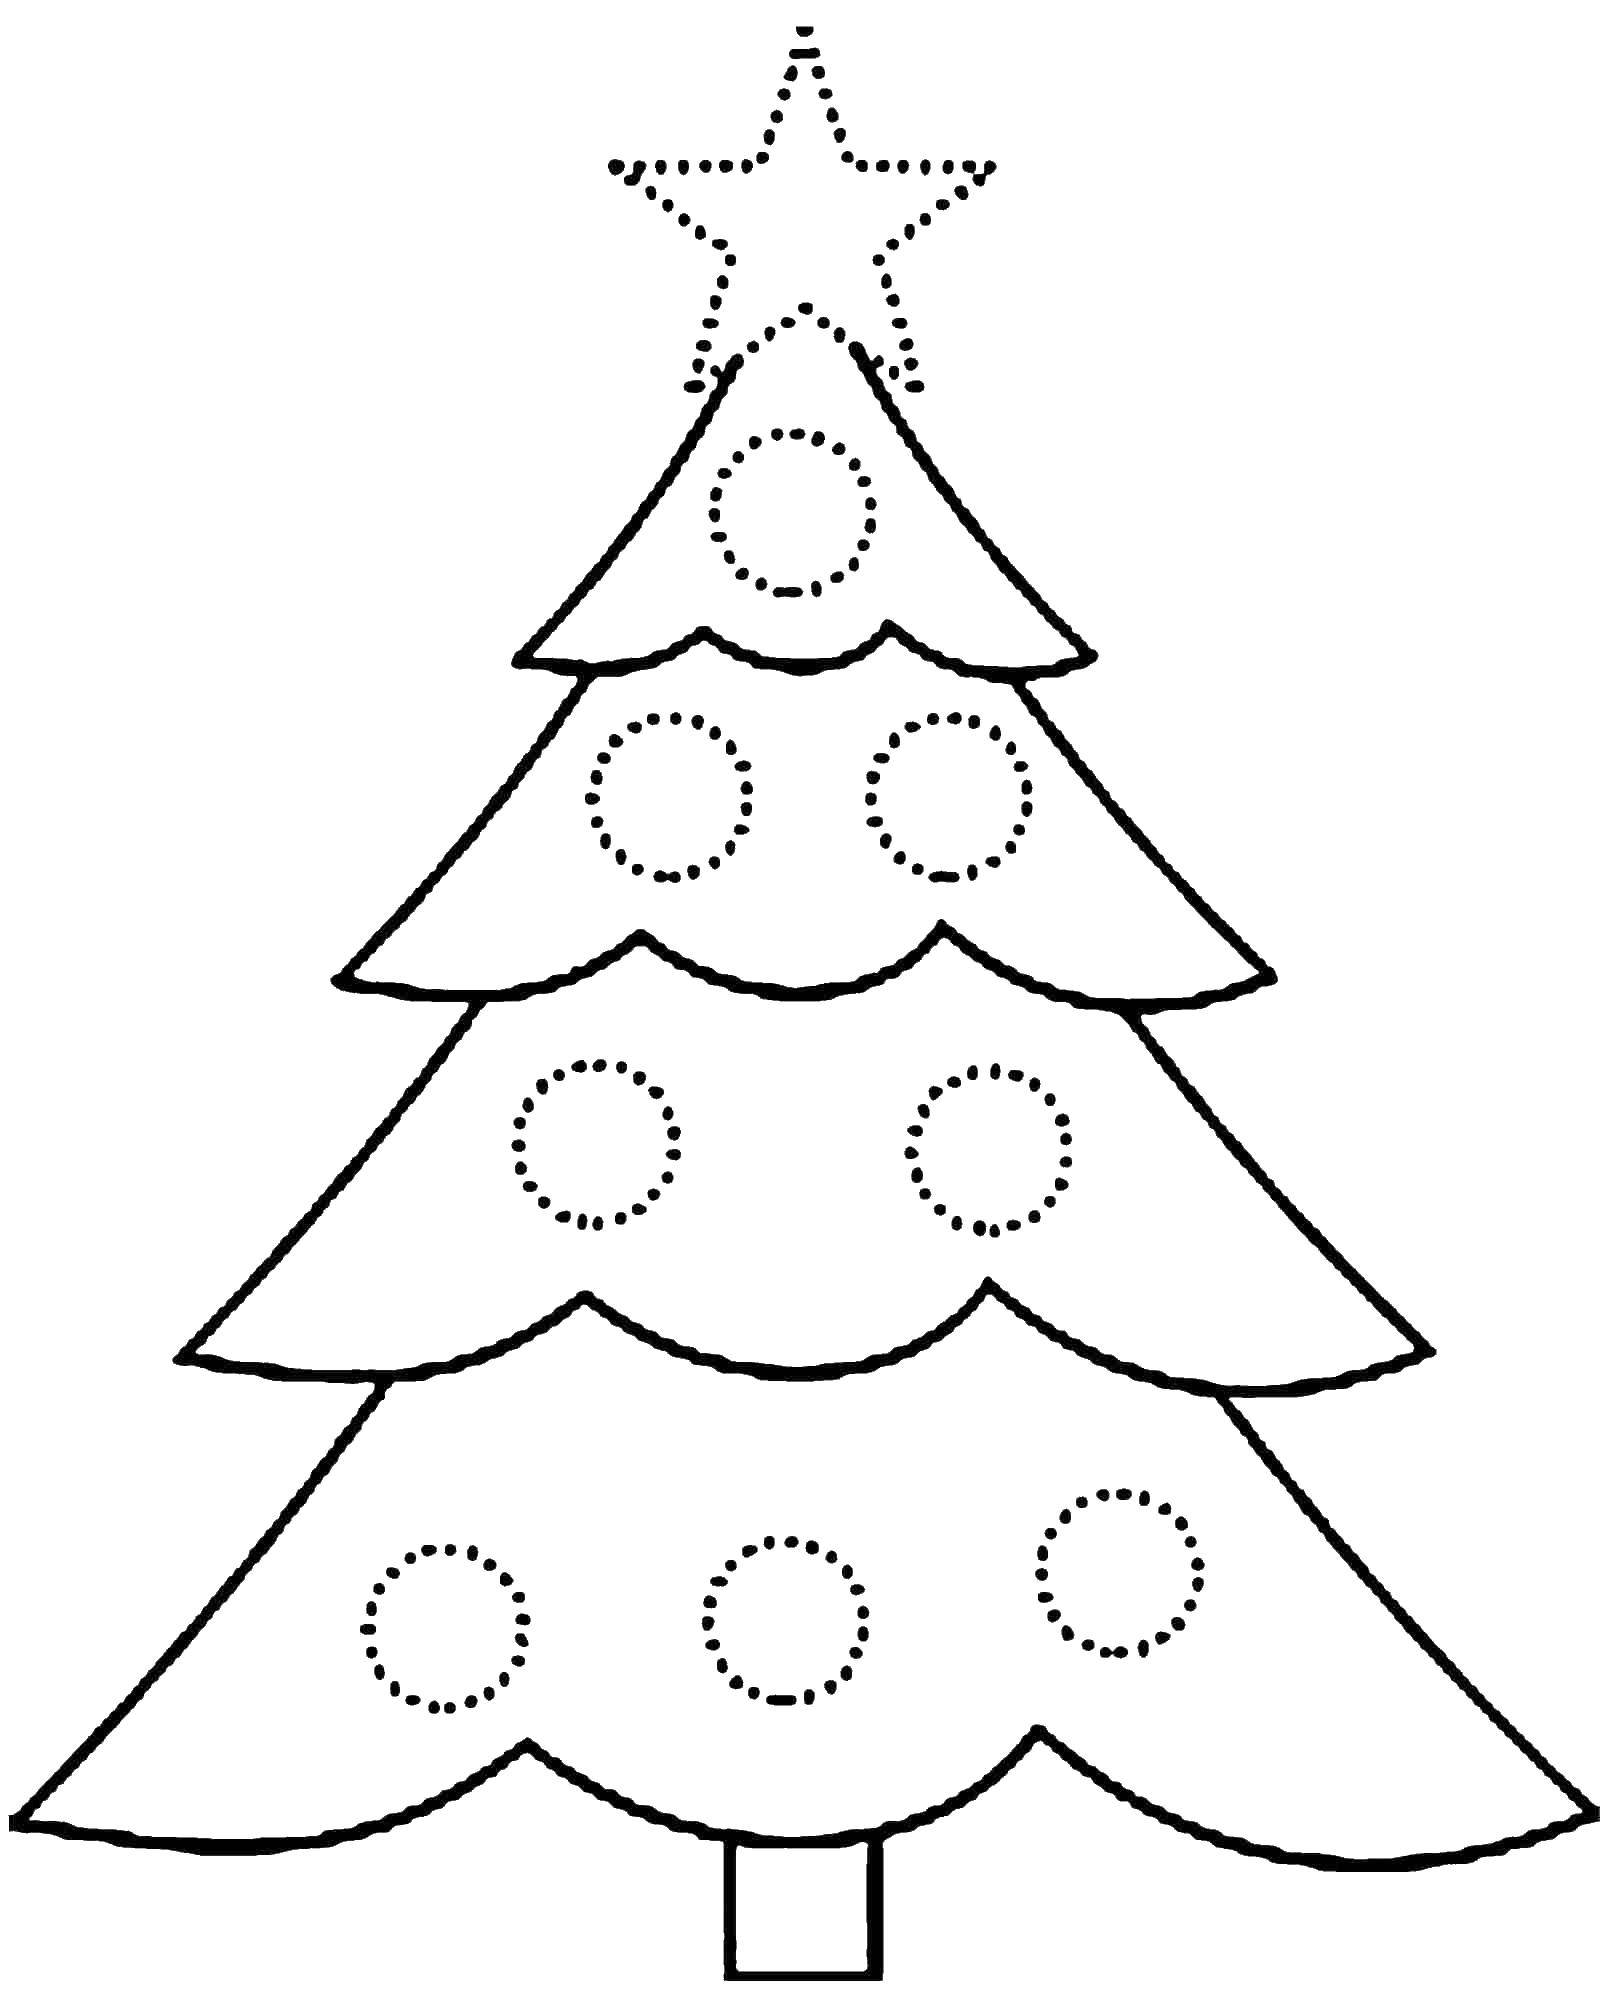 Coloring Christmas tree. Category new year. Tags:  new year. tree.